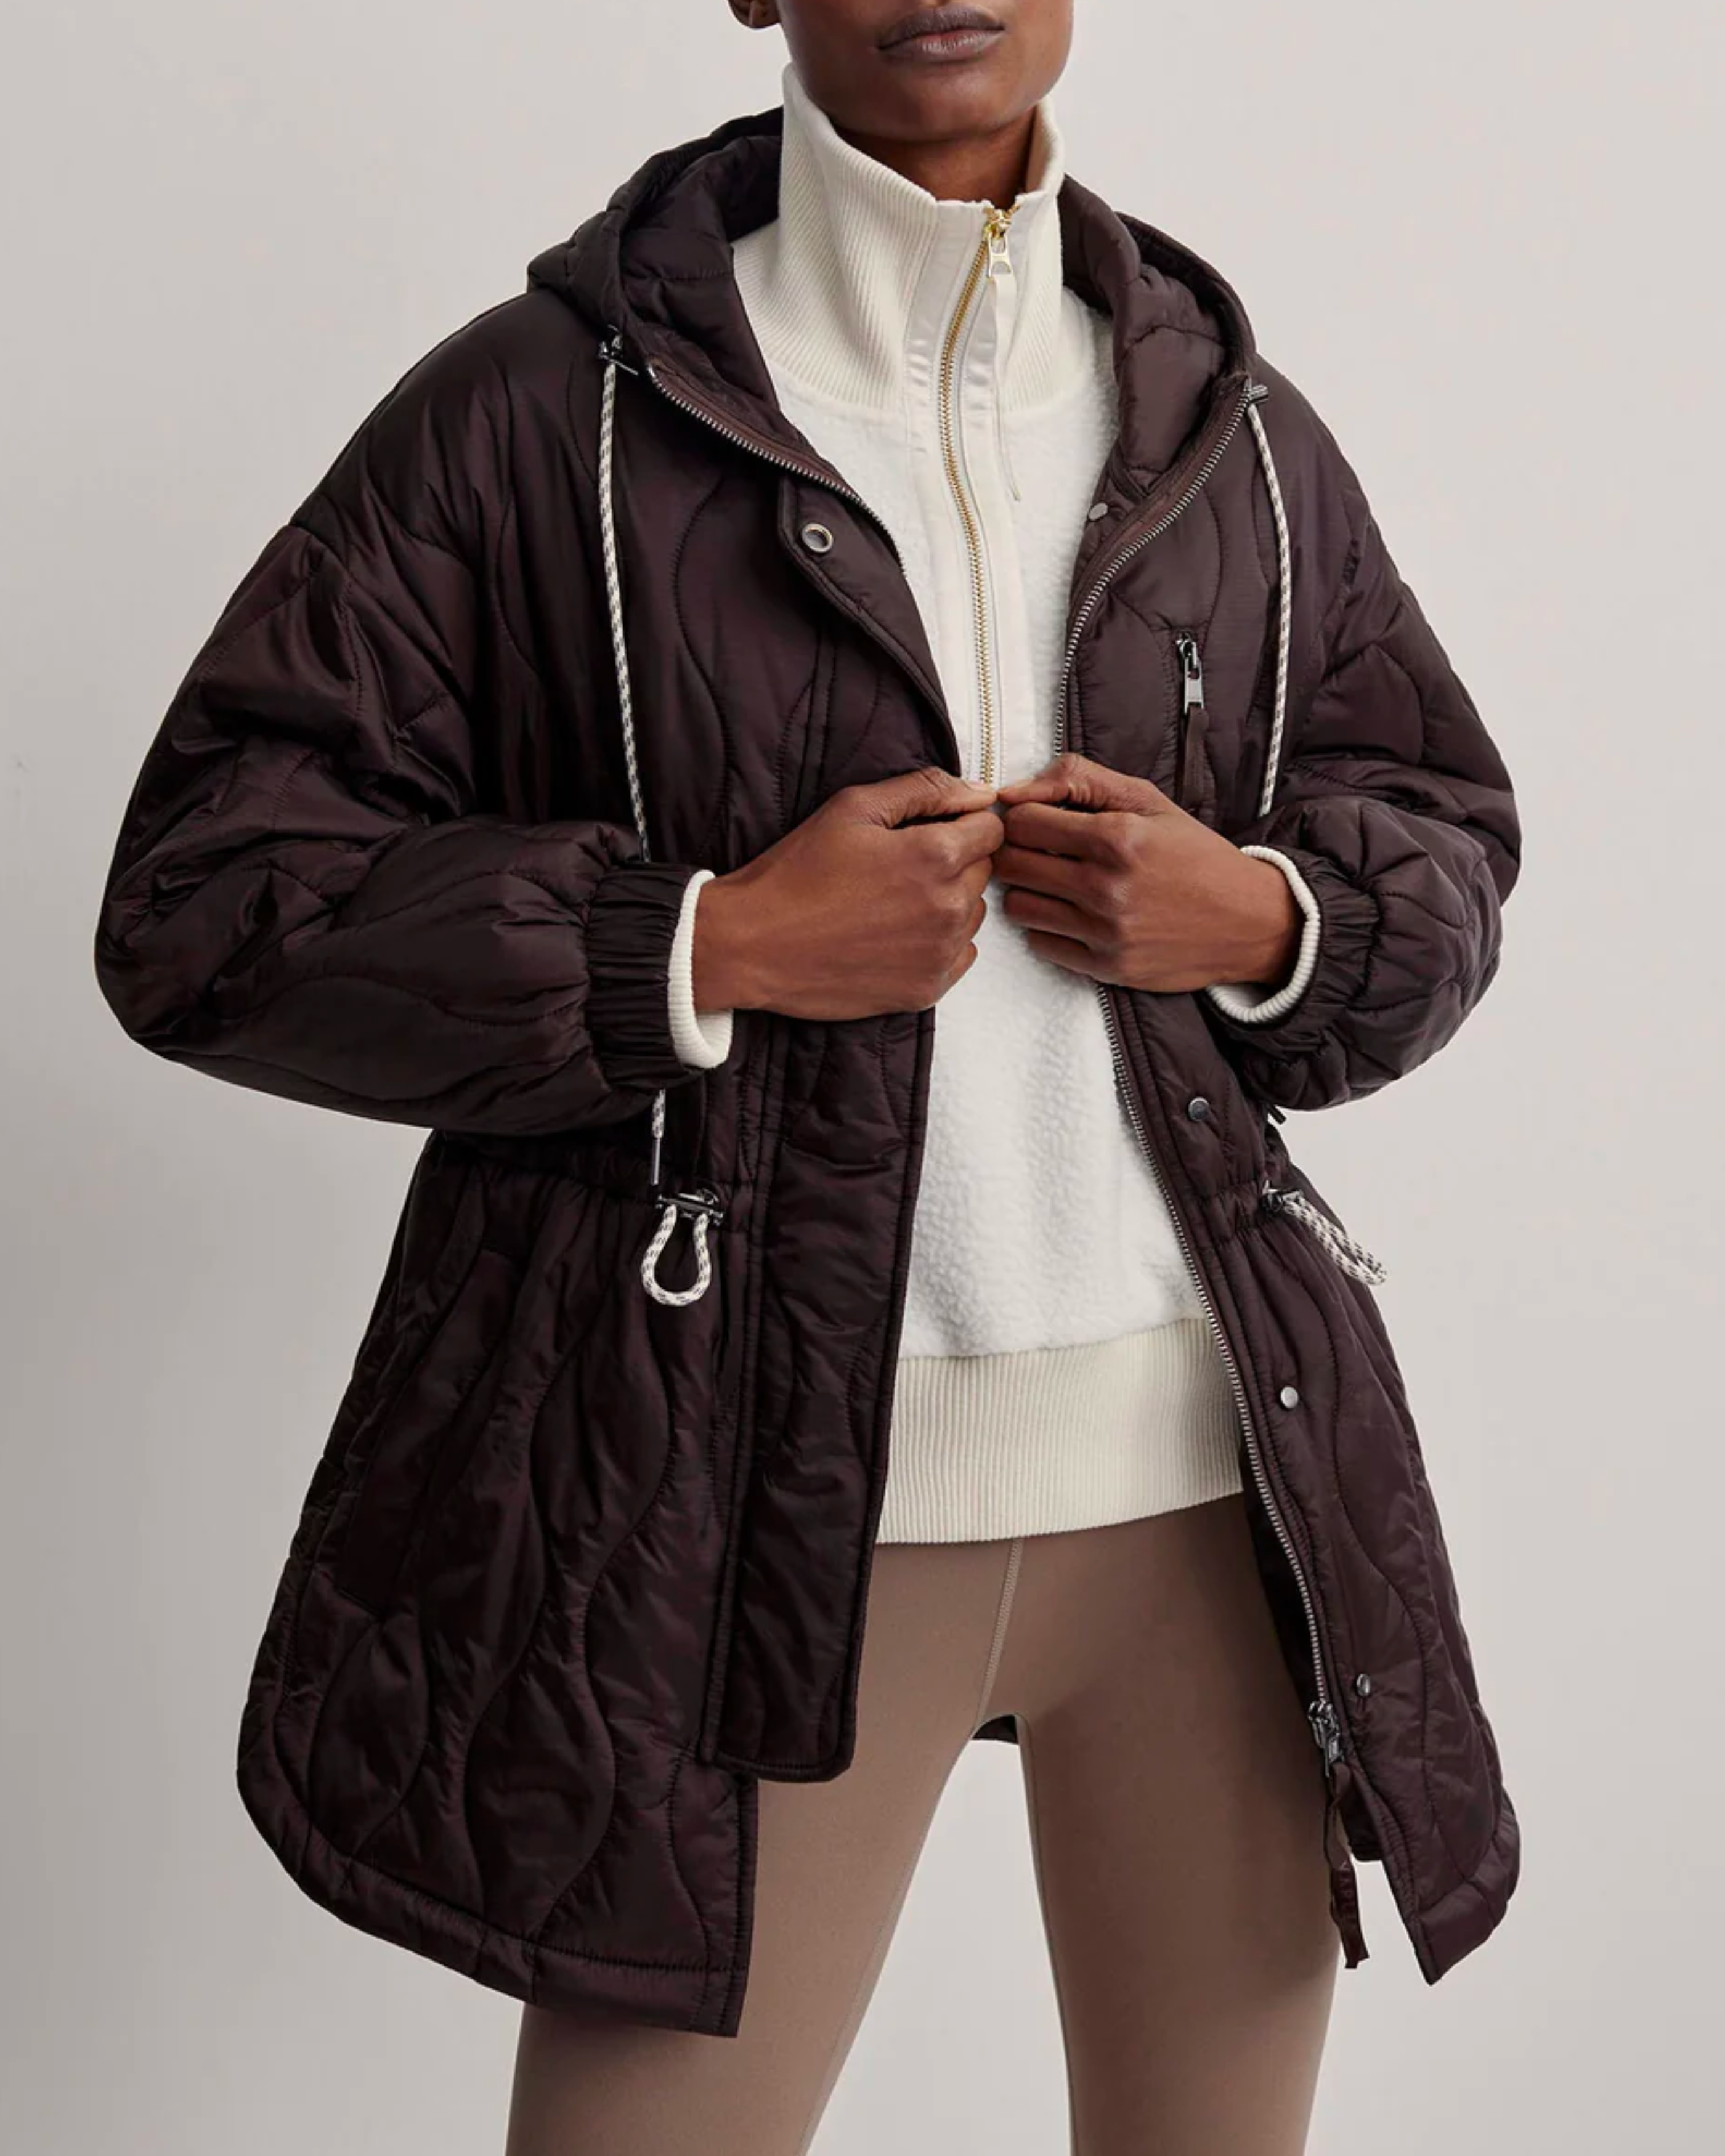 Varley Caitlin Quilt Jacket in Coffee Bean